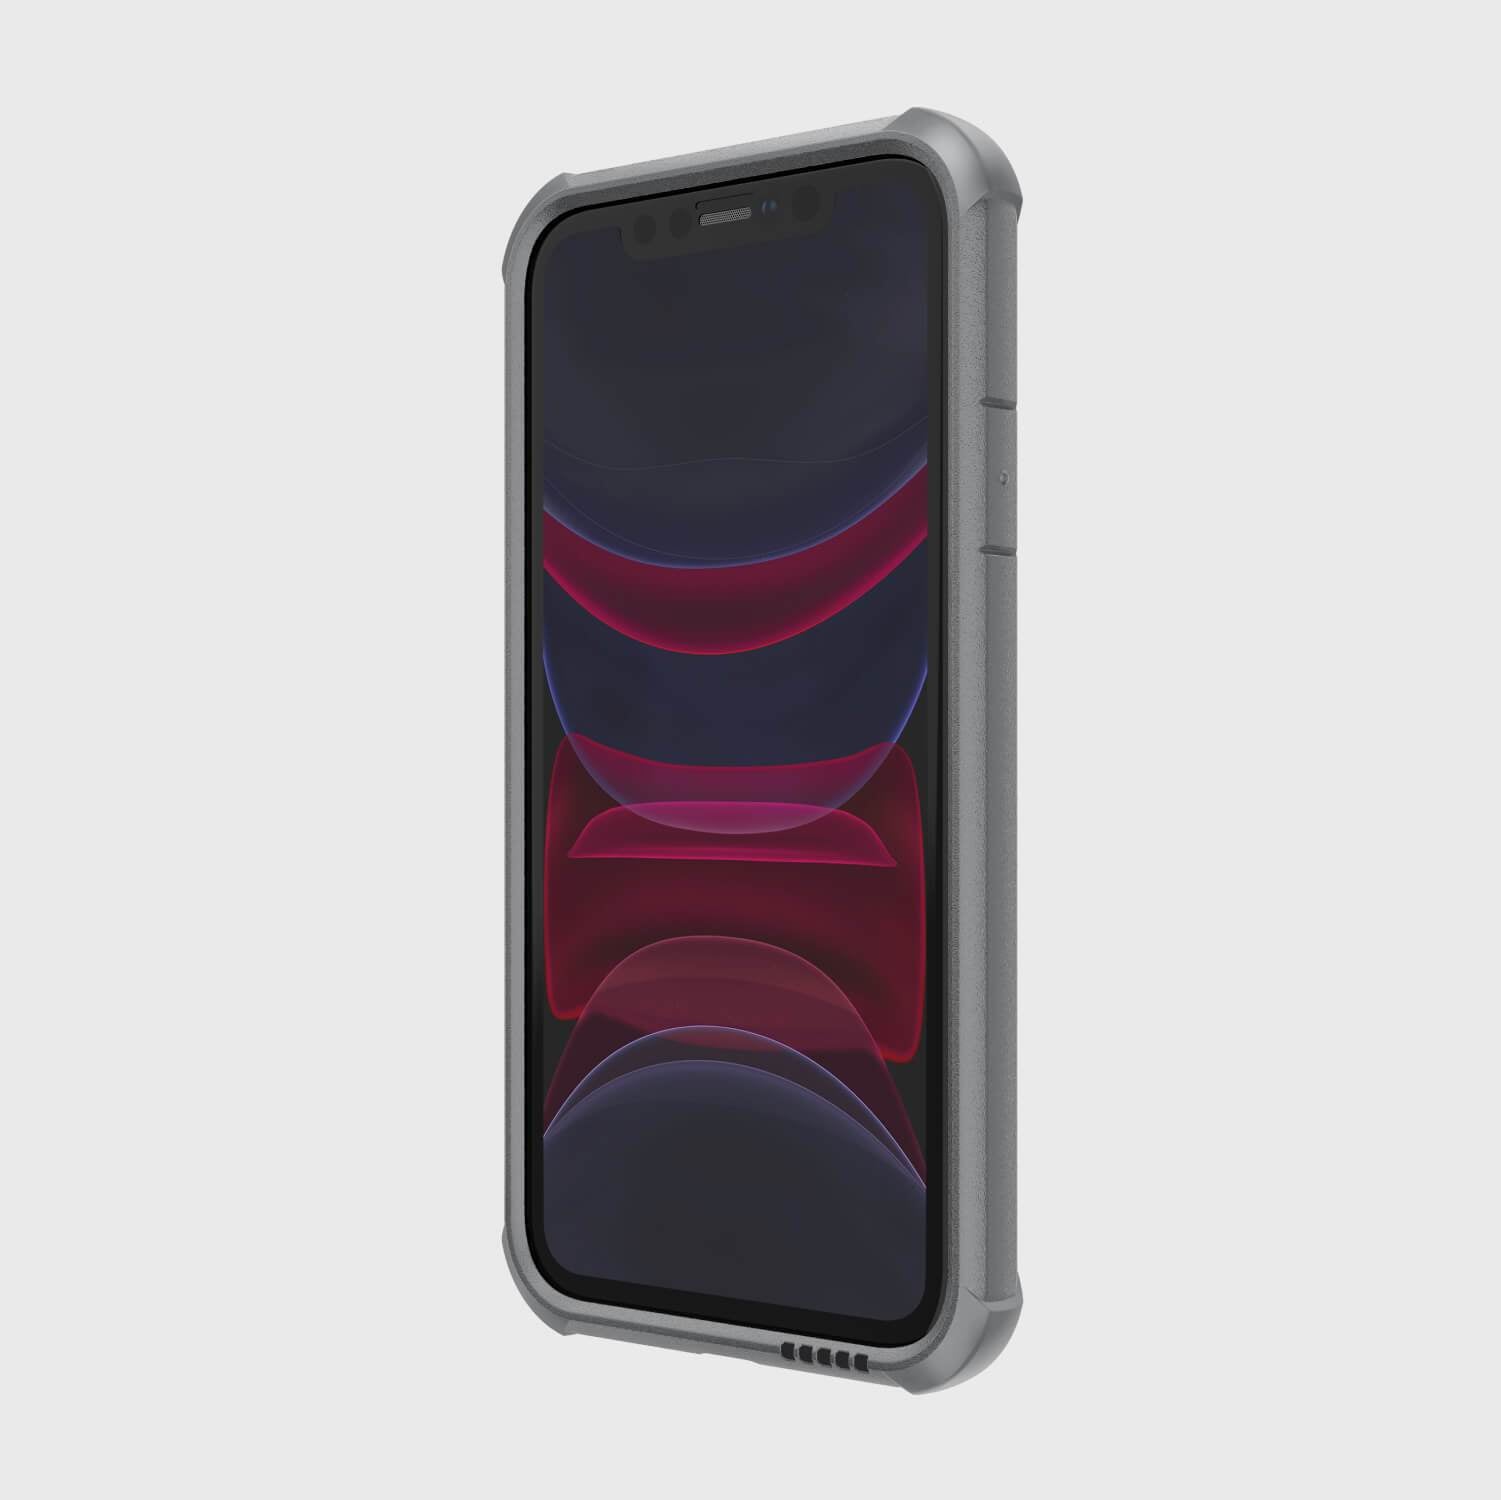 The protective iPhone 11 Pro case - TACTICAL by Raptic is shown on a white background.